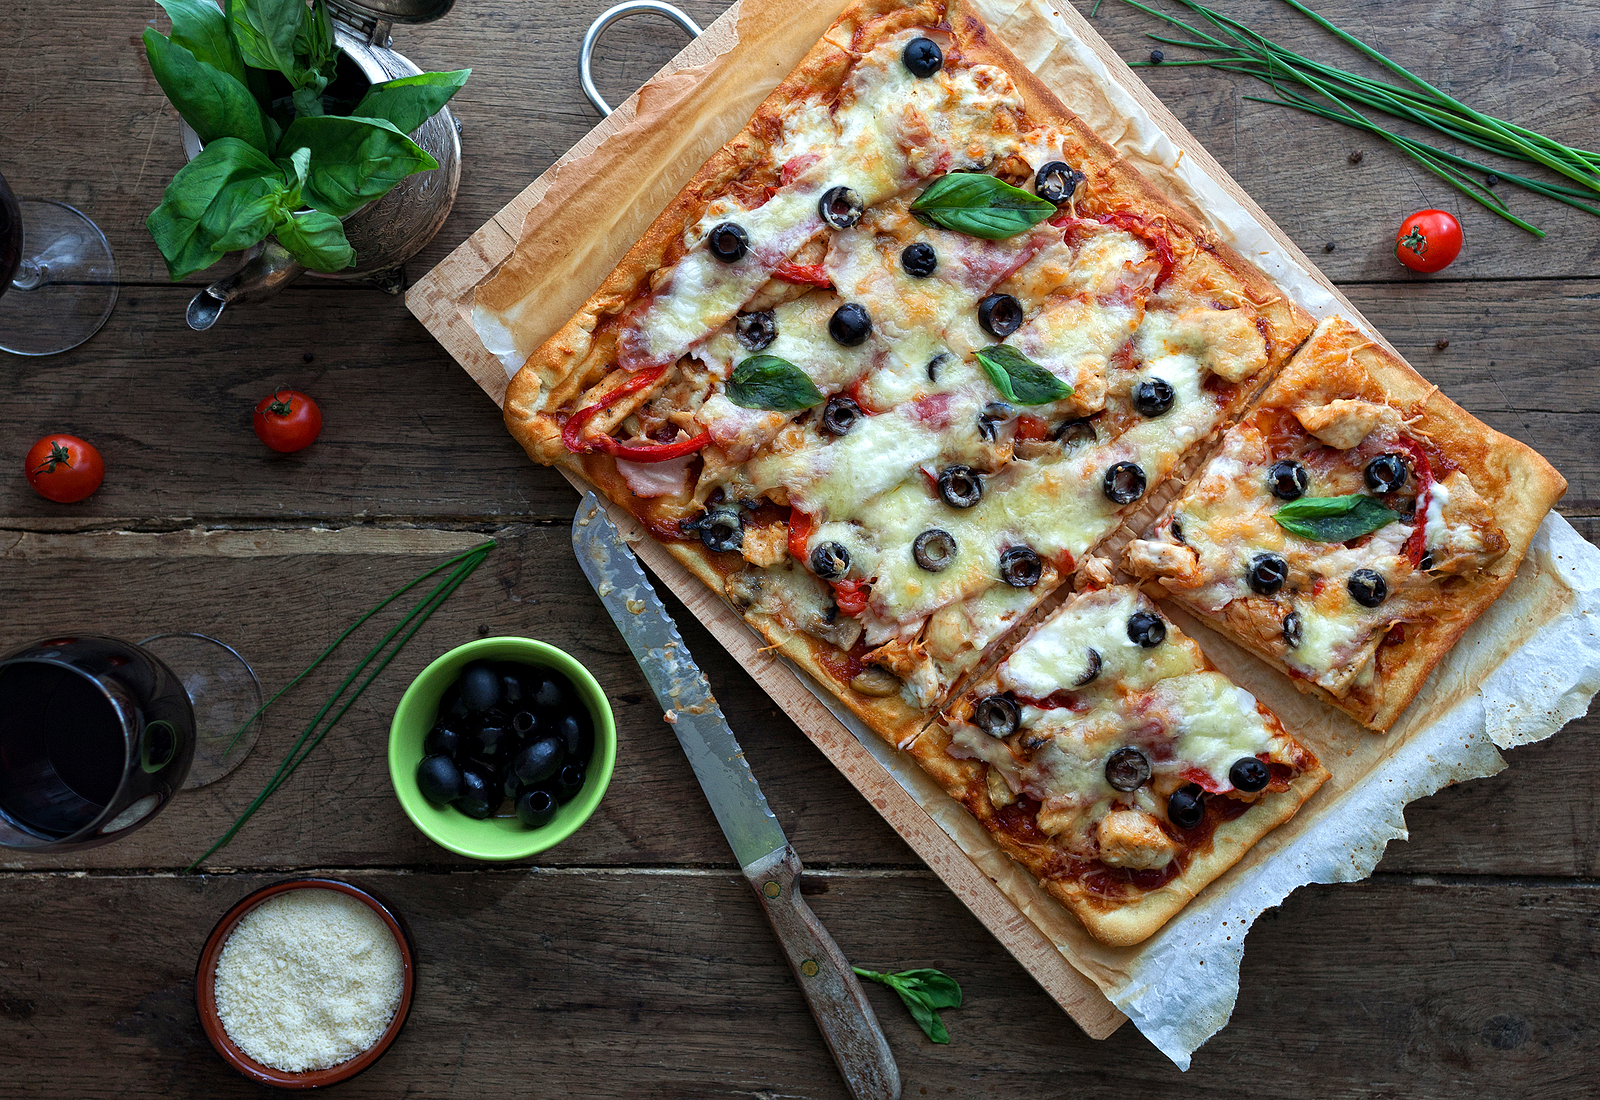 Healthy Pizza and a Good Book to Read – What Could be Better?